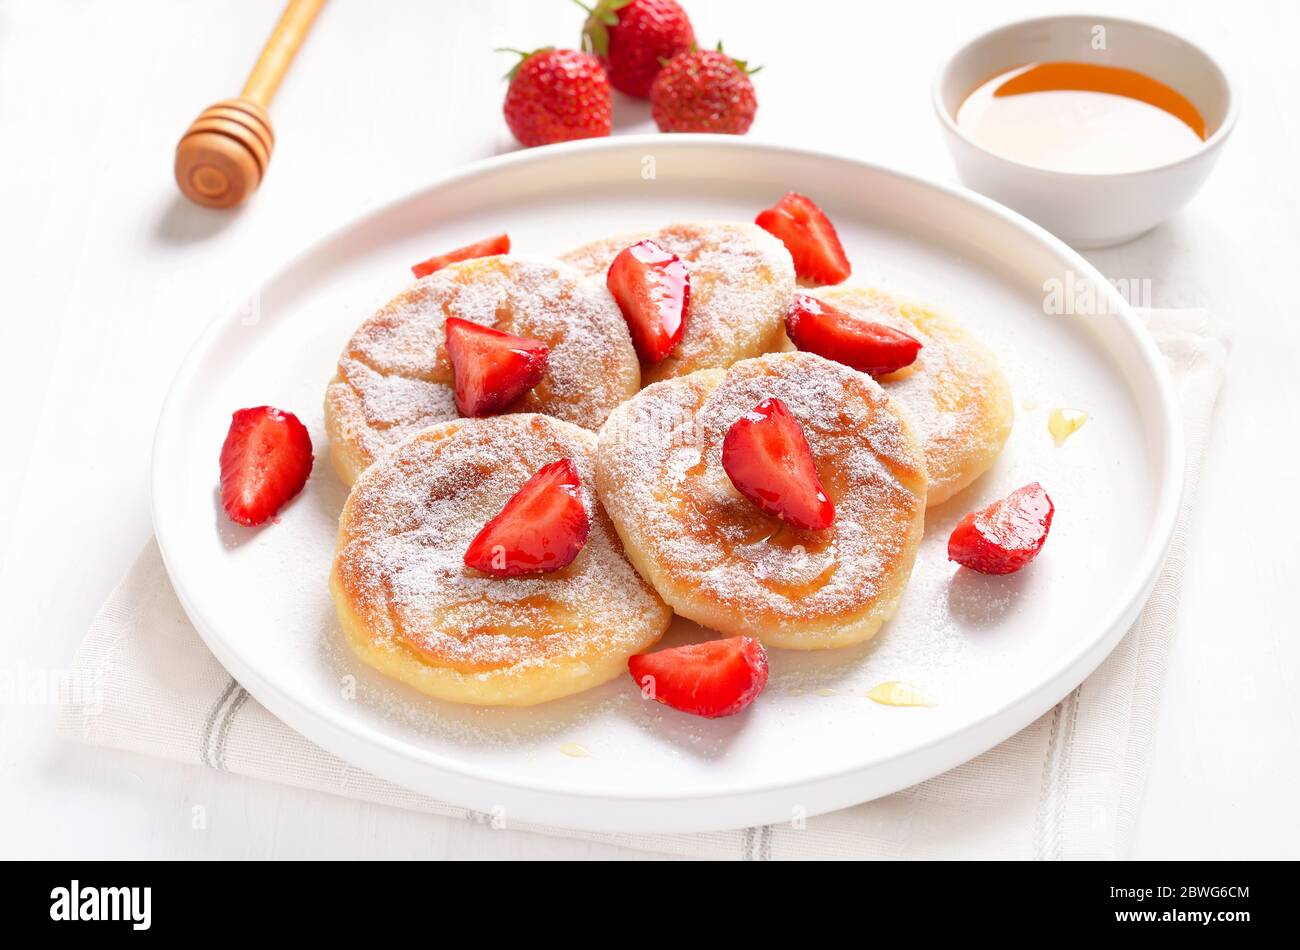 Homemade pancakes with cottage cheese and strawberry slices, syrniki, close up view Stock Photo